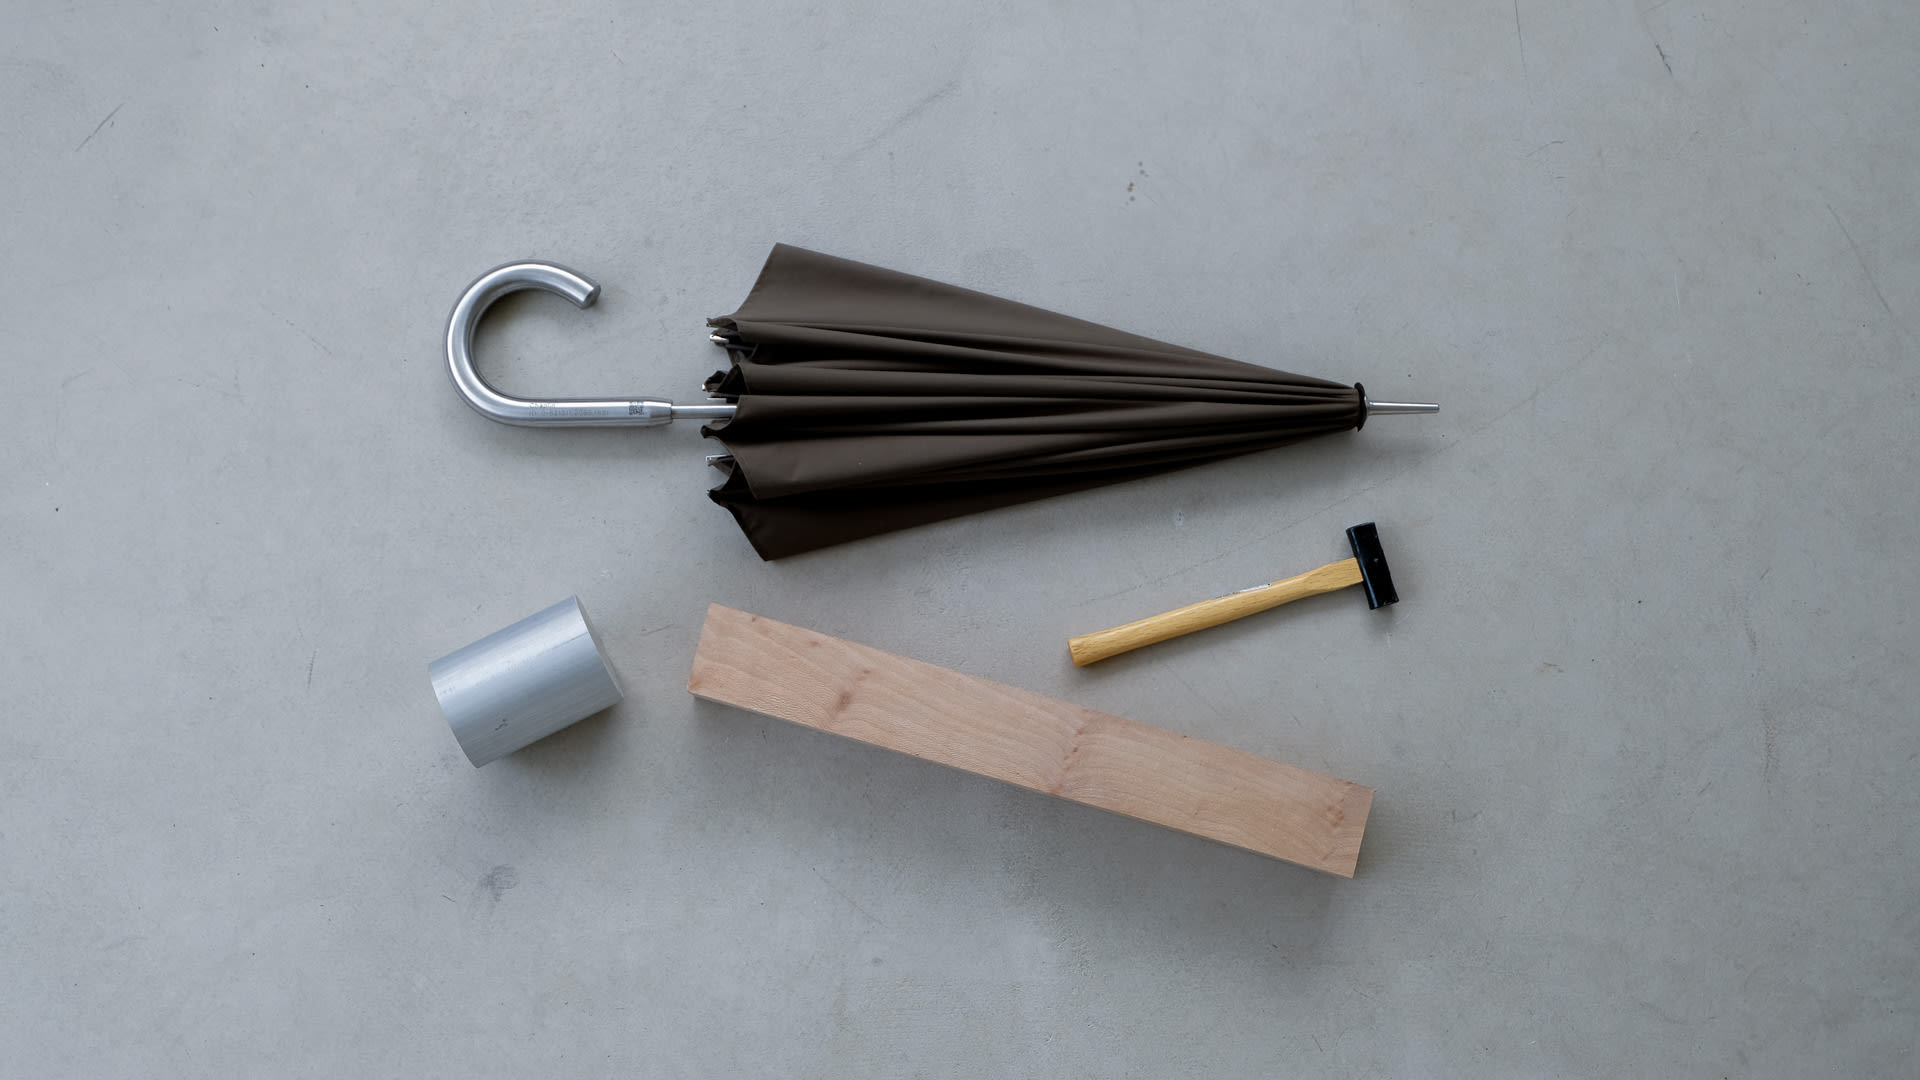 Made to last objects are often energy & resource hungry in production and the Durable umbrella is designed to reflect this.